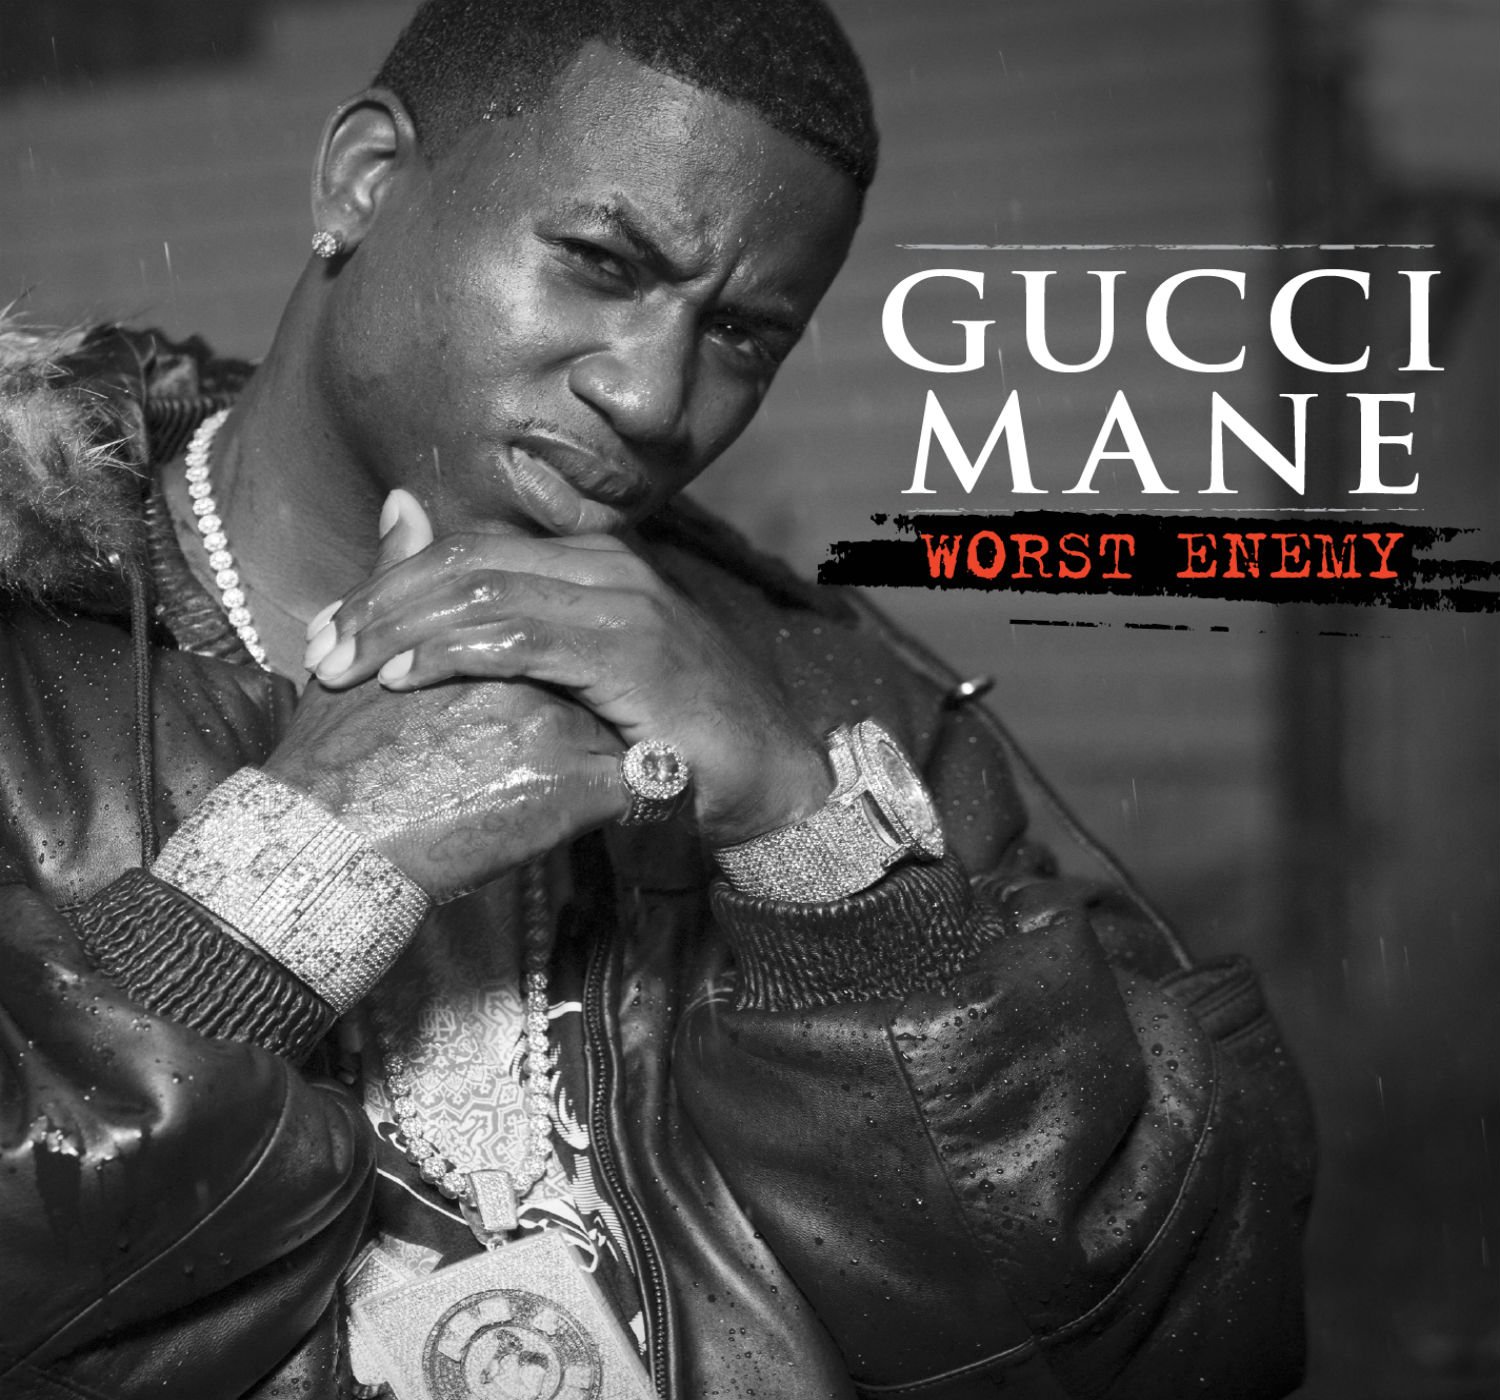 Gucci mane wallpapers